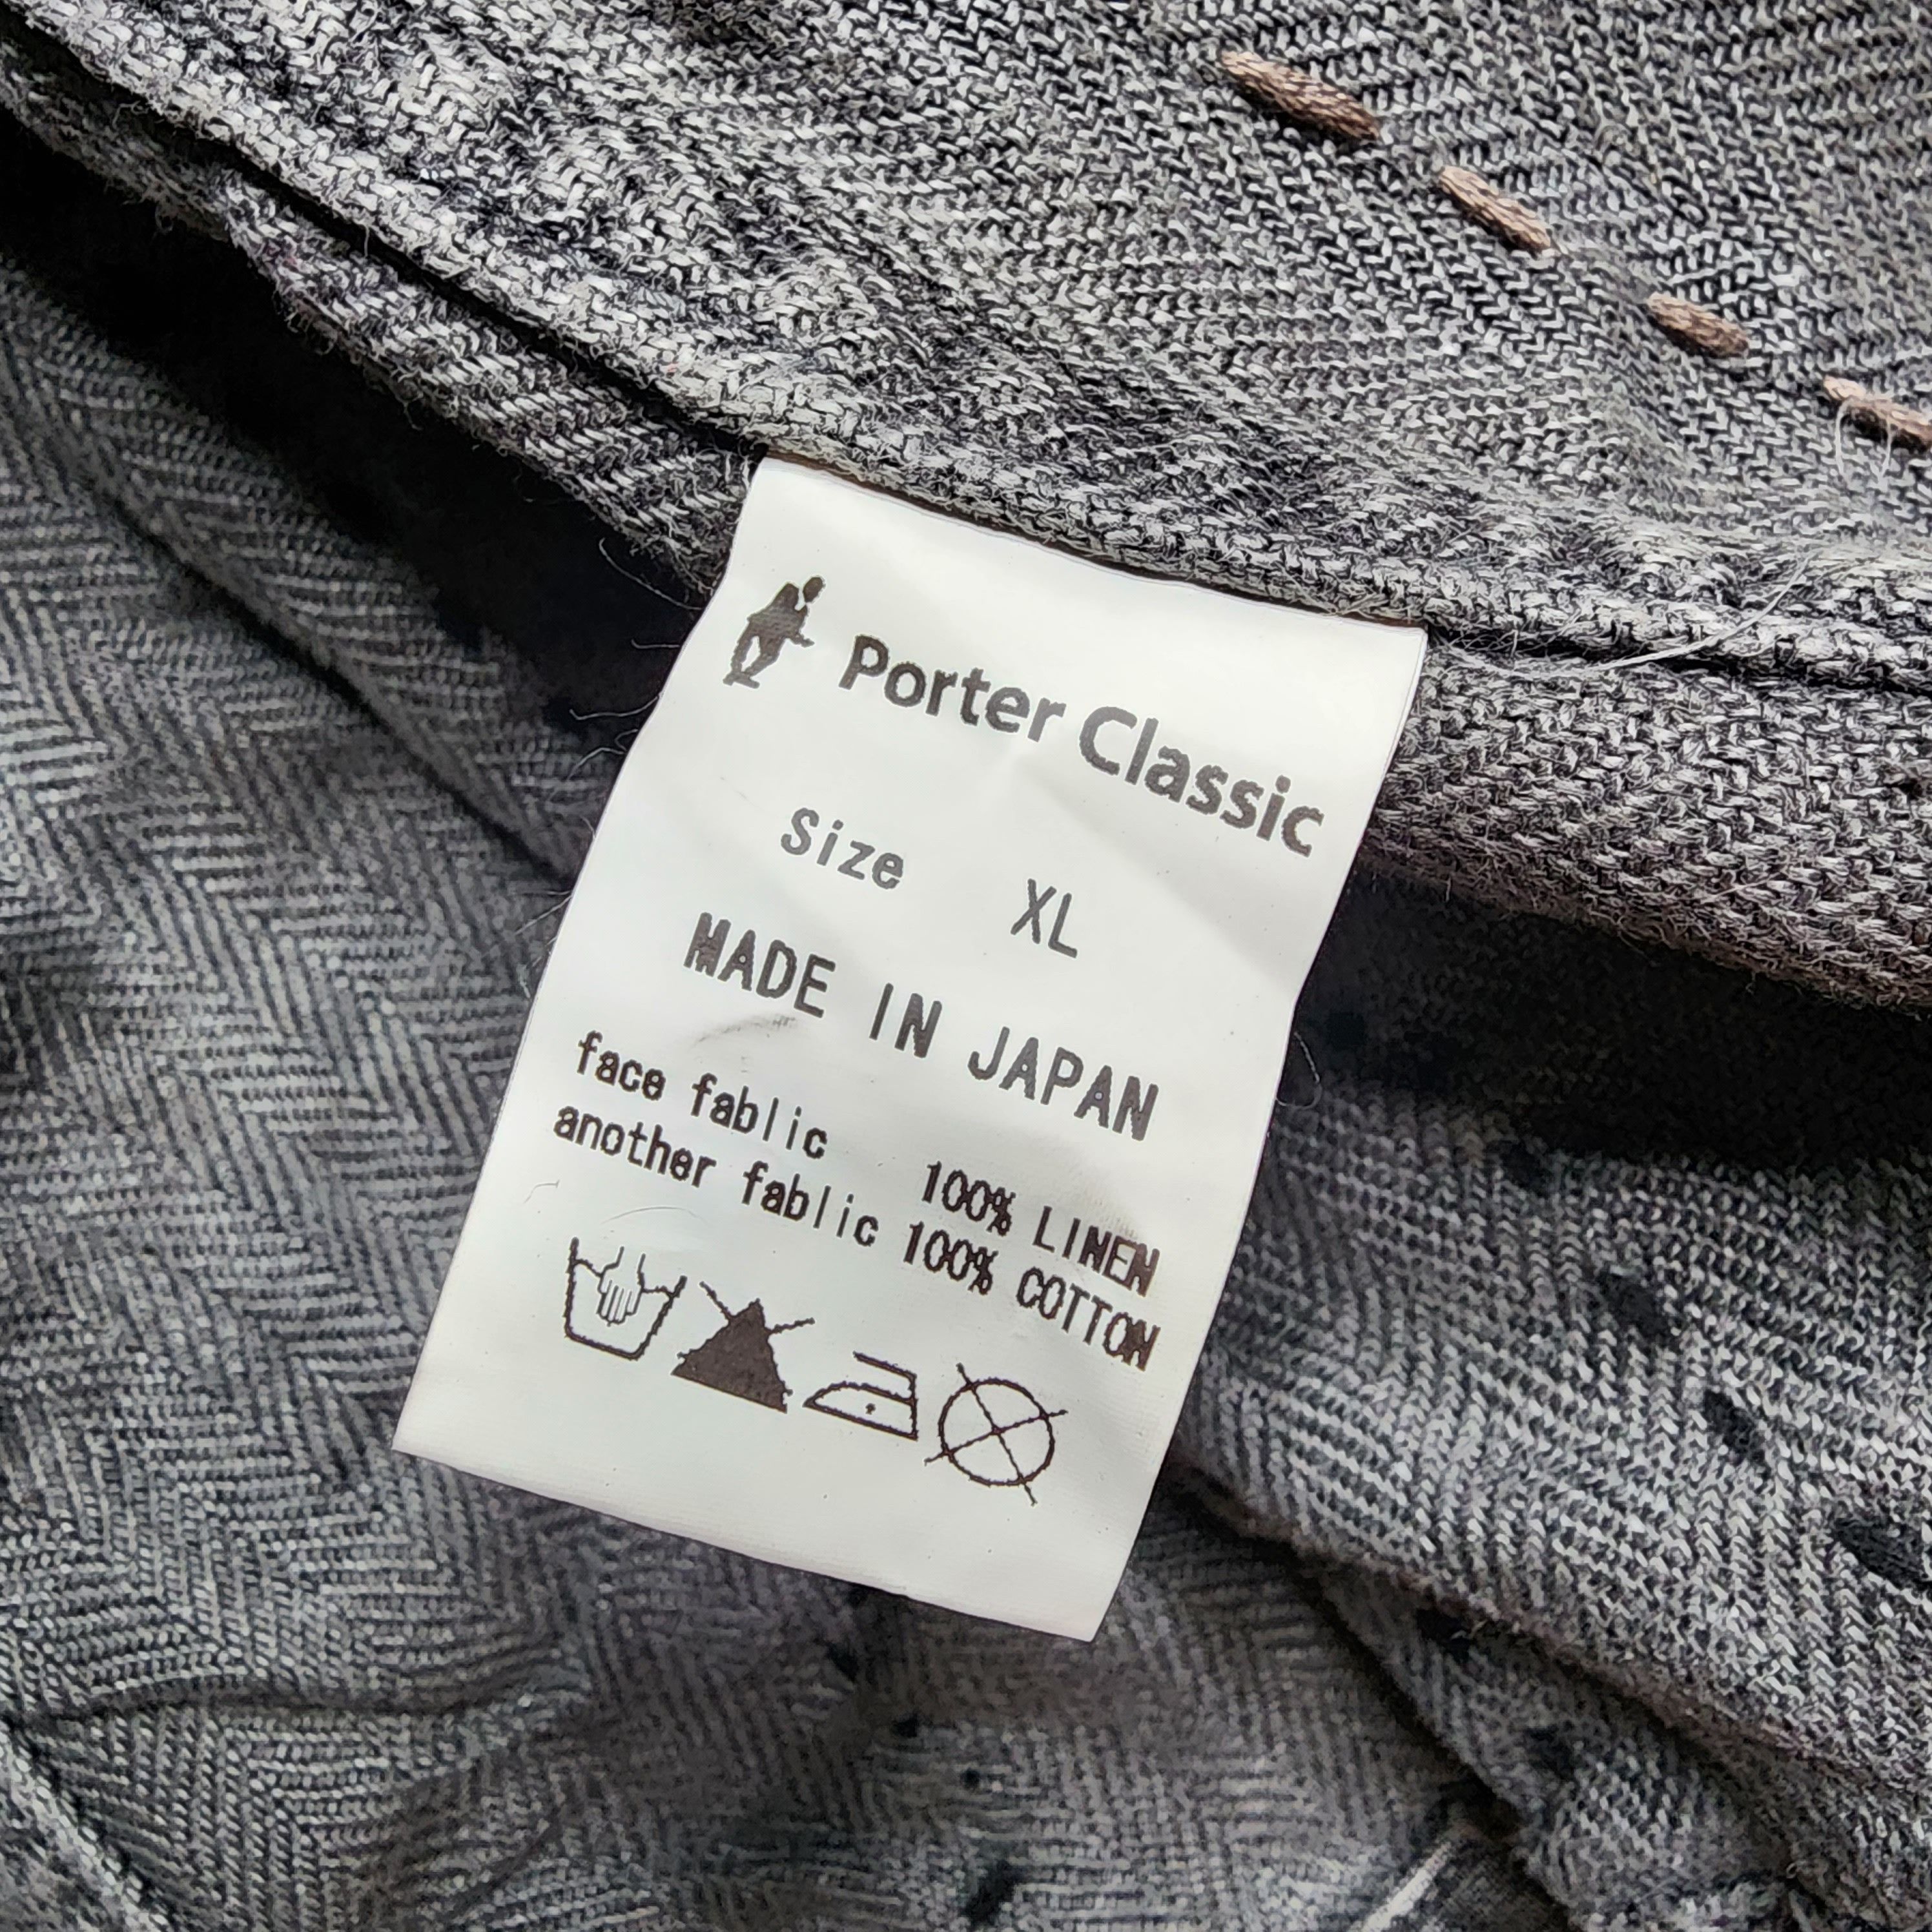 Porter Classic - SS13 Boro Patchwork French Work Jacket - 11